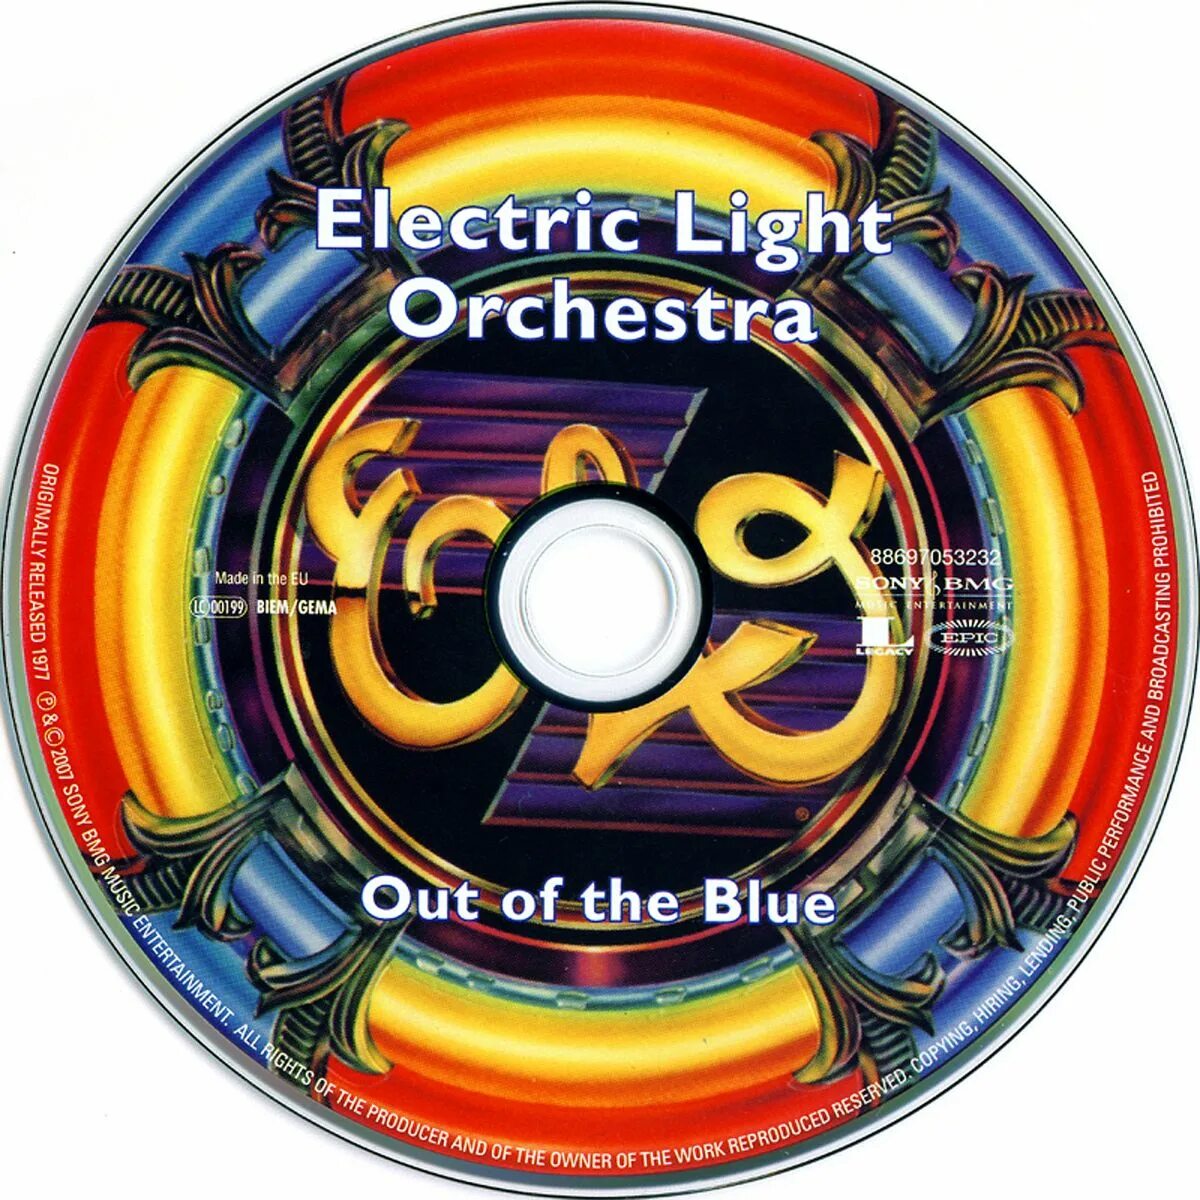 Blue light orchestra. Electric Light Orchestra out of the Blue 1977. Elo out of the Blue 1977. Electric Light Orchestra - out of the Blue обложка. Elo CD.